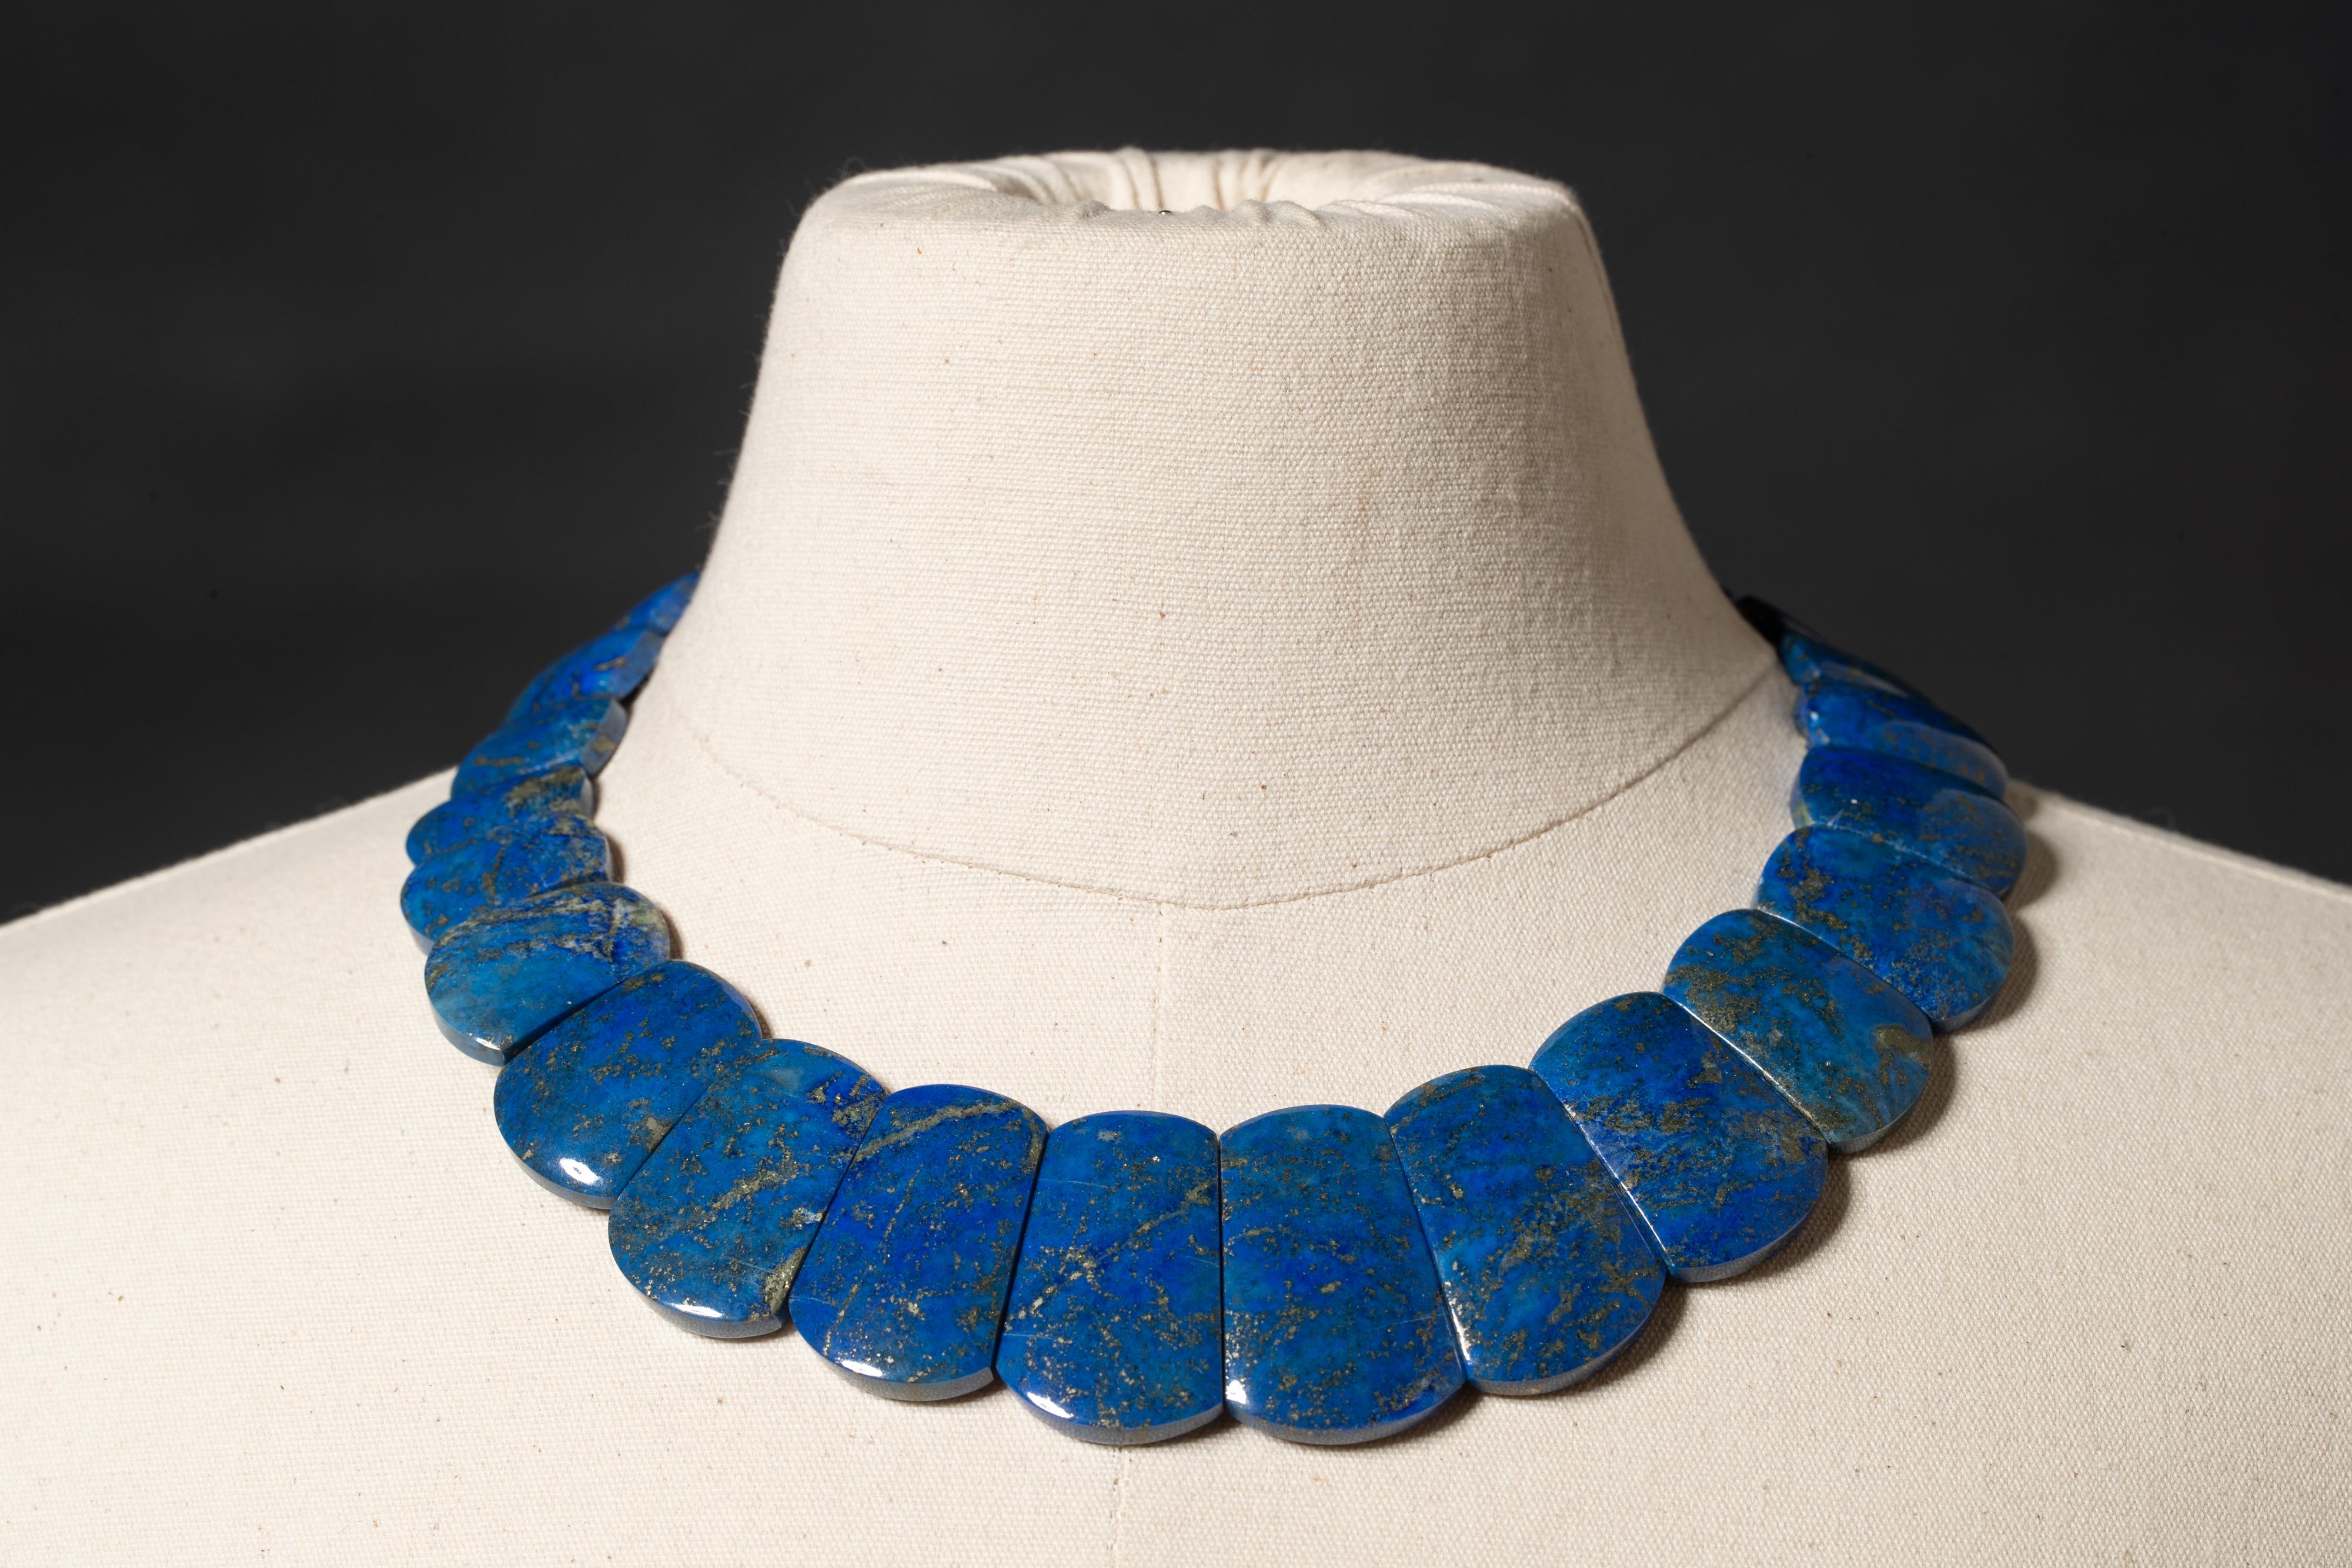 Rare and unusual cut and size of lapis lazuli beads with the natural flecks of pyrite indigenous to the stone.  Slightly graduated.  Sits flat and nice on an open neckline or inside a shirt.  Sterling silver clasp.  By Deborah Lockhart Phillips.